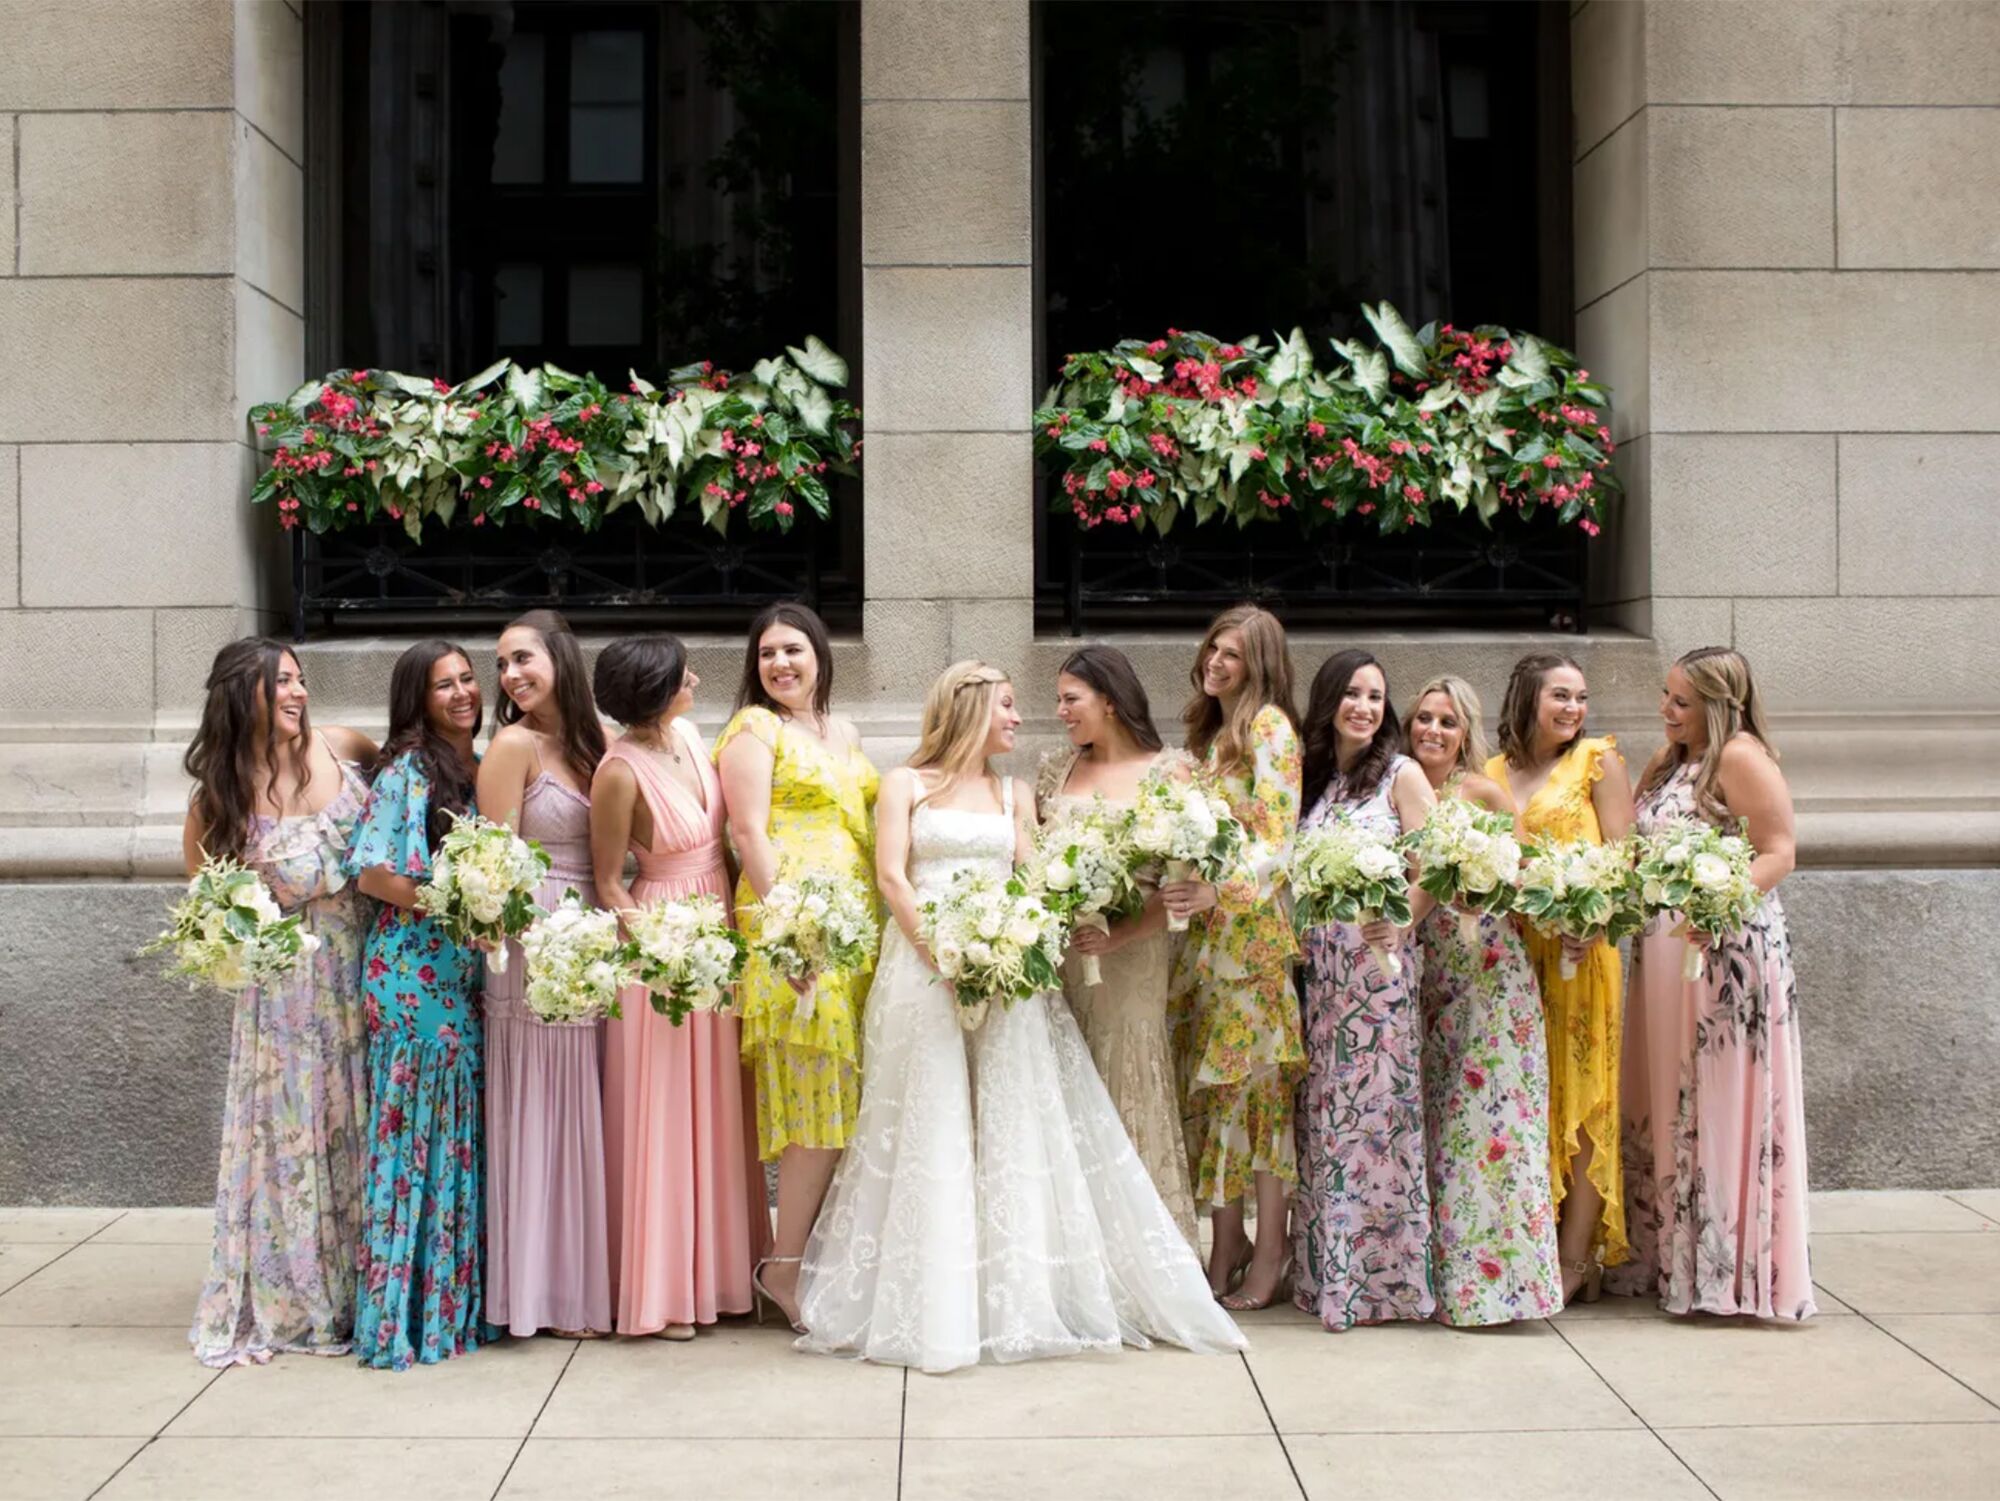 Bride and bridesmaids in spring floral dresses